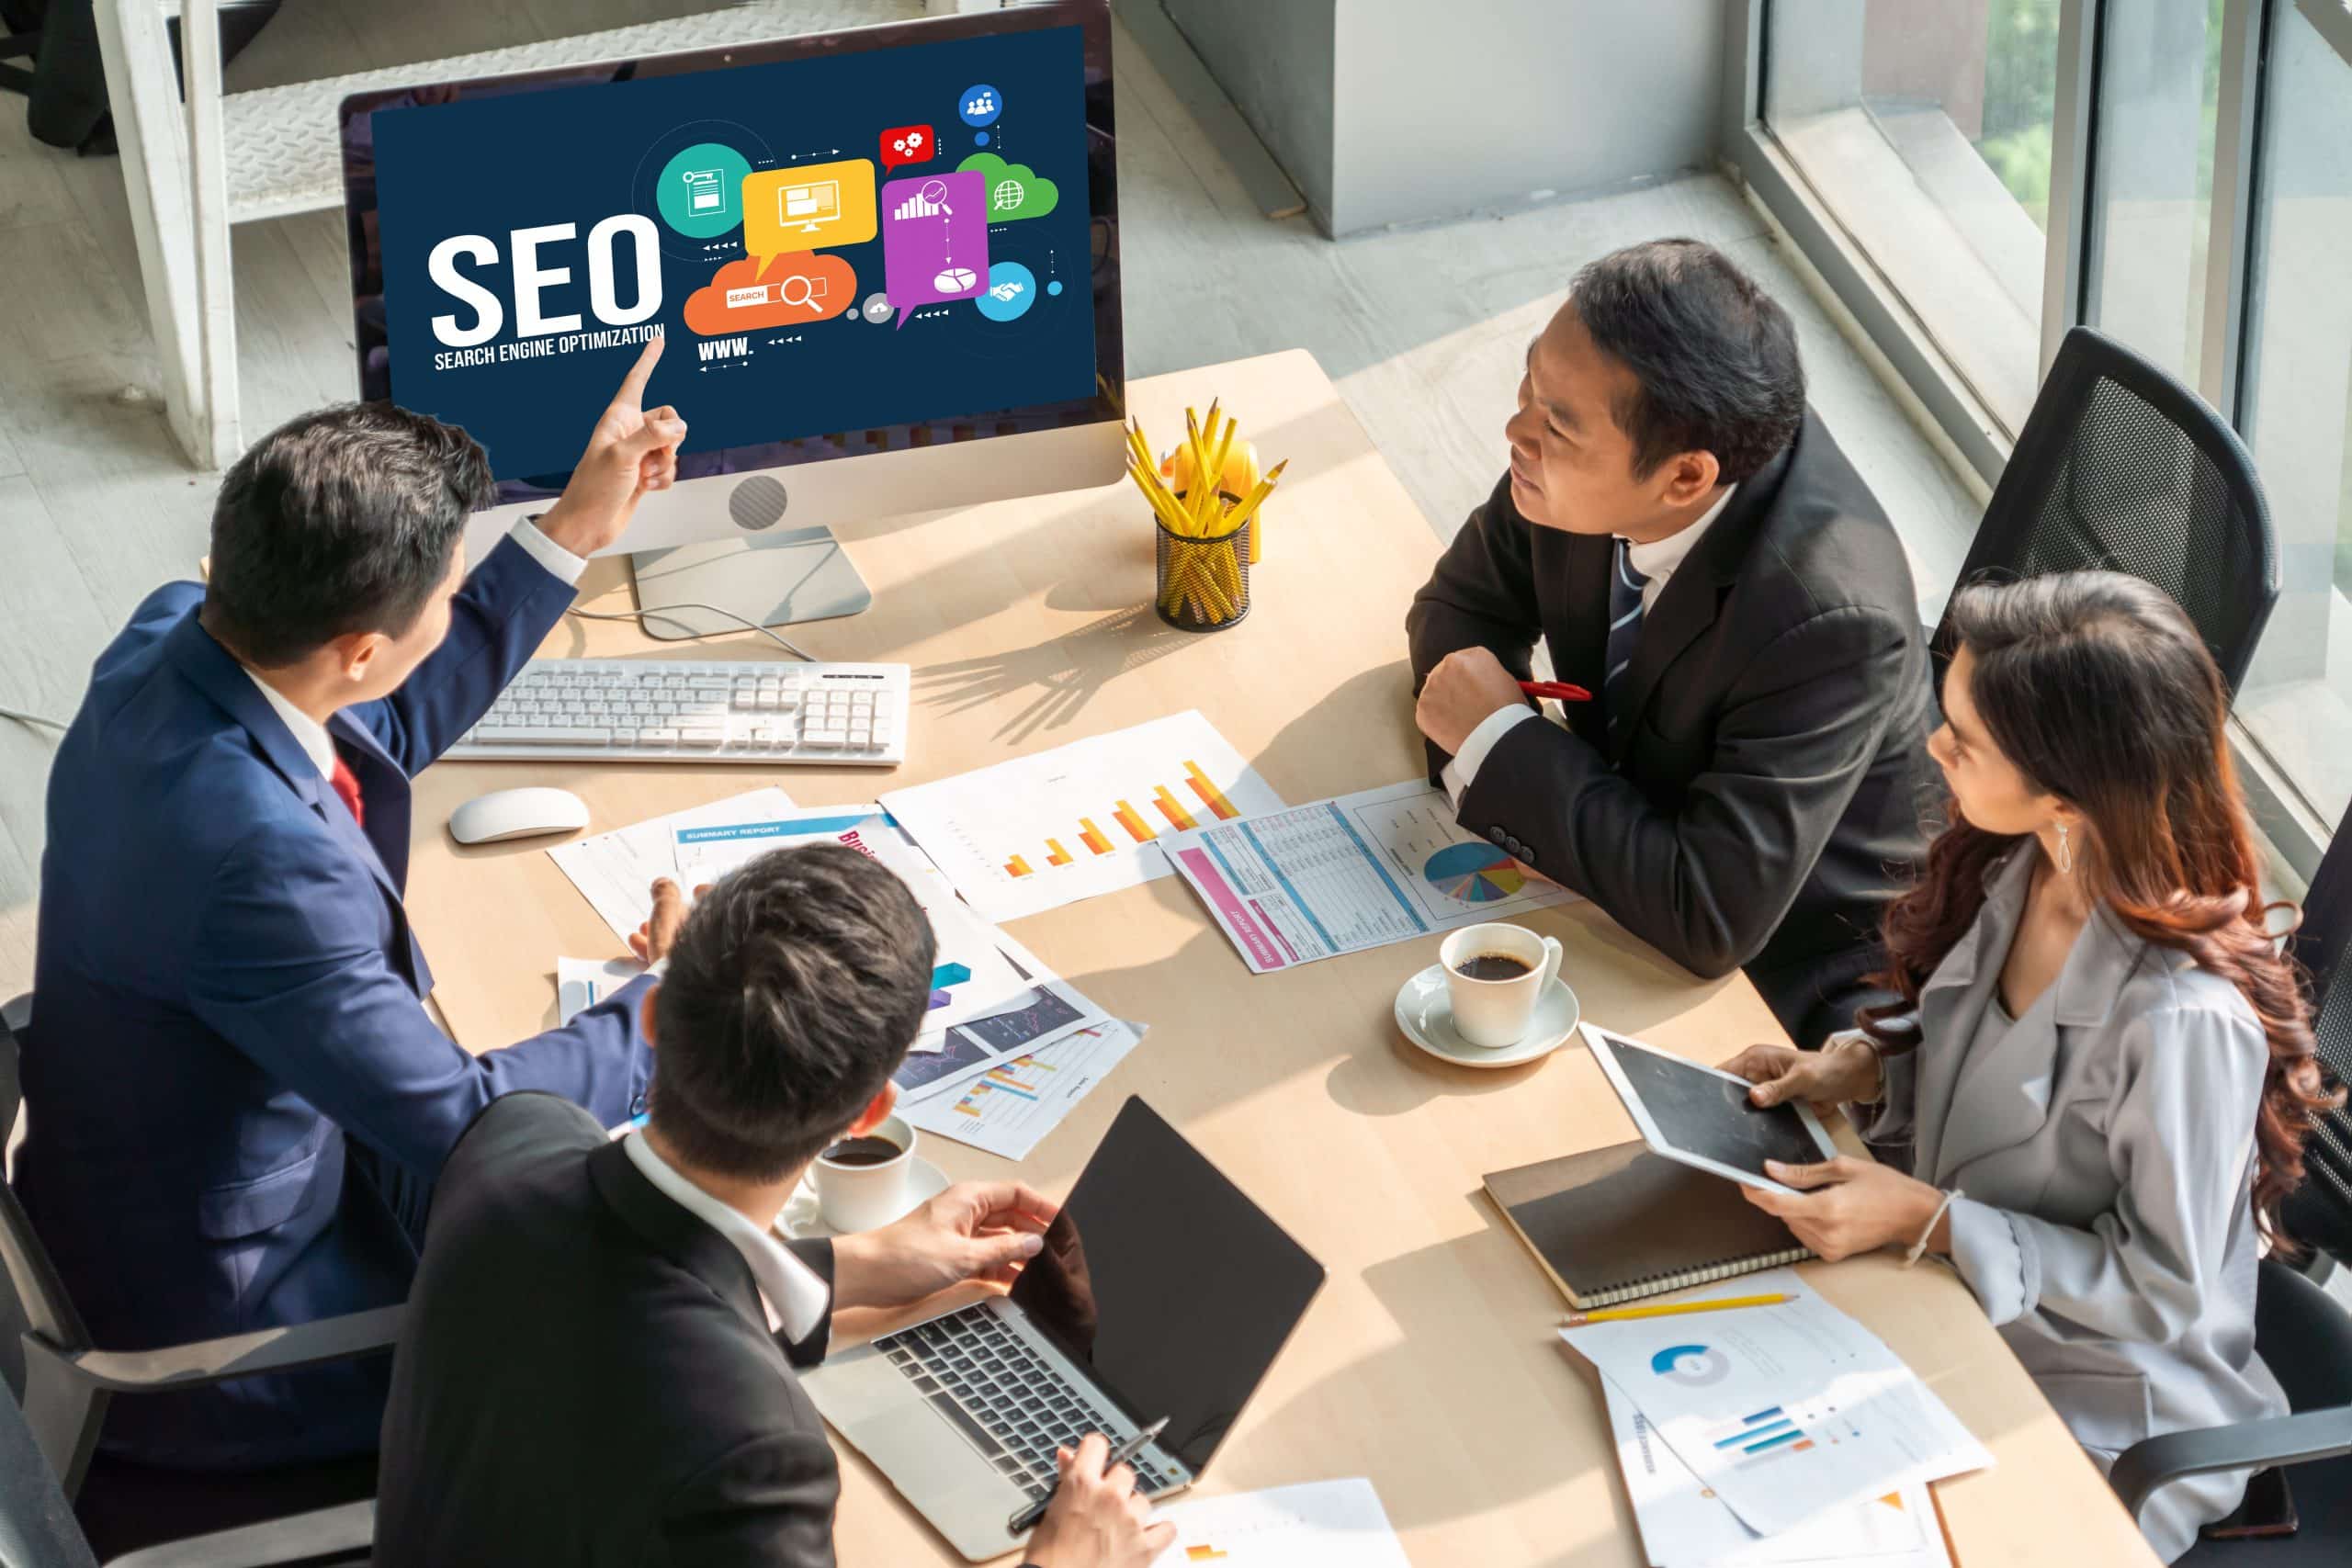 seo goals and objectives